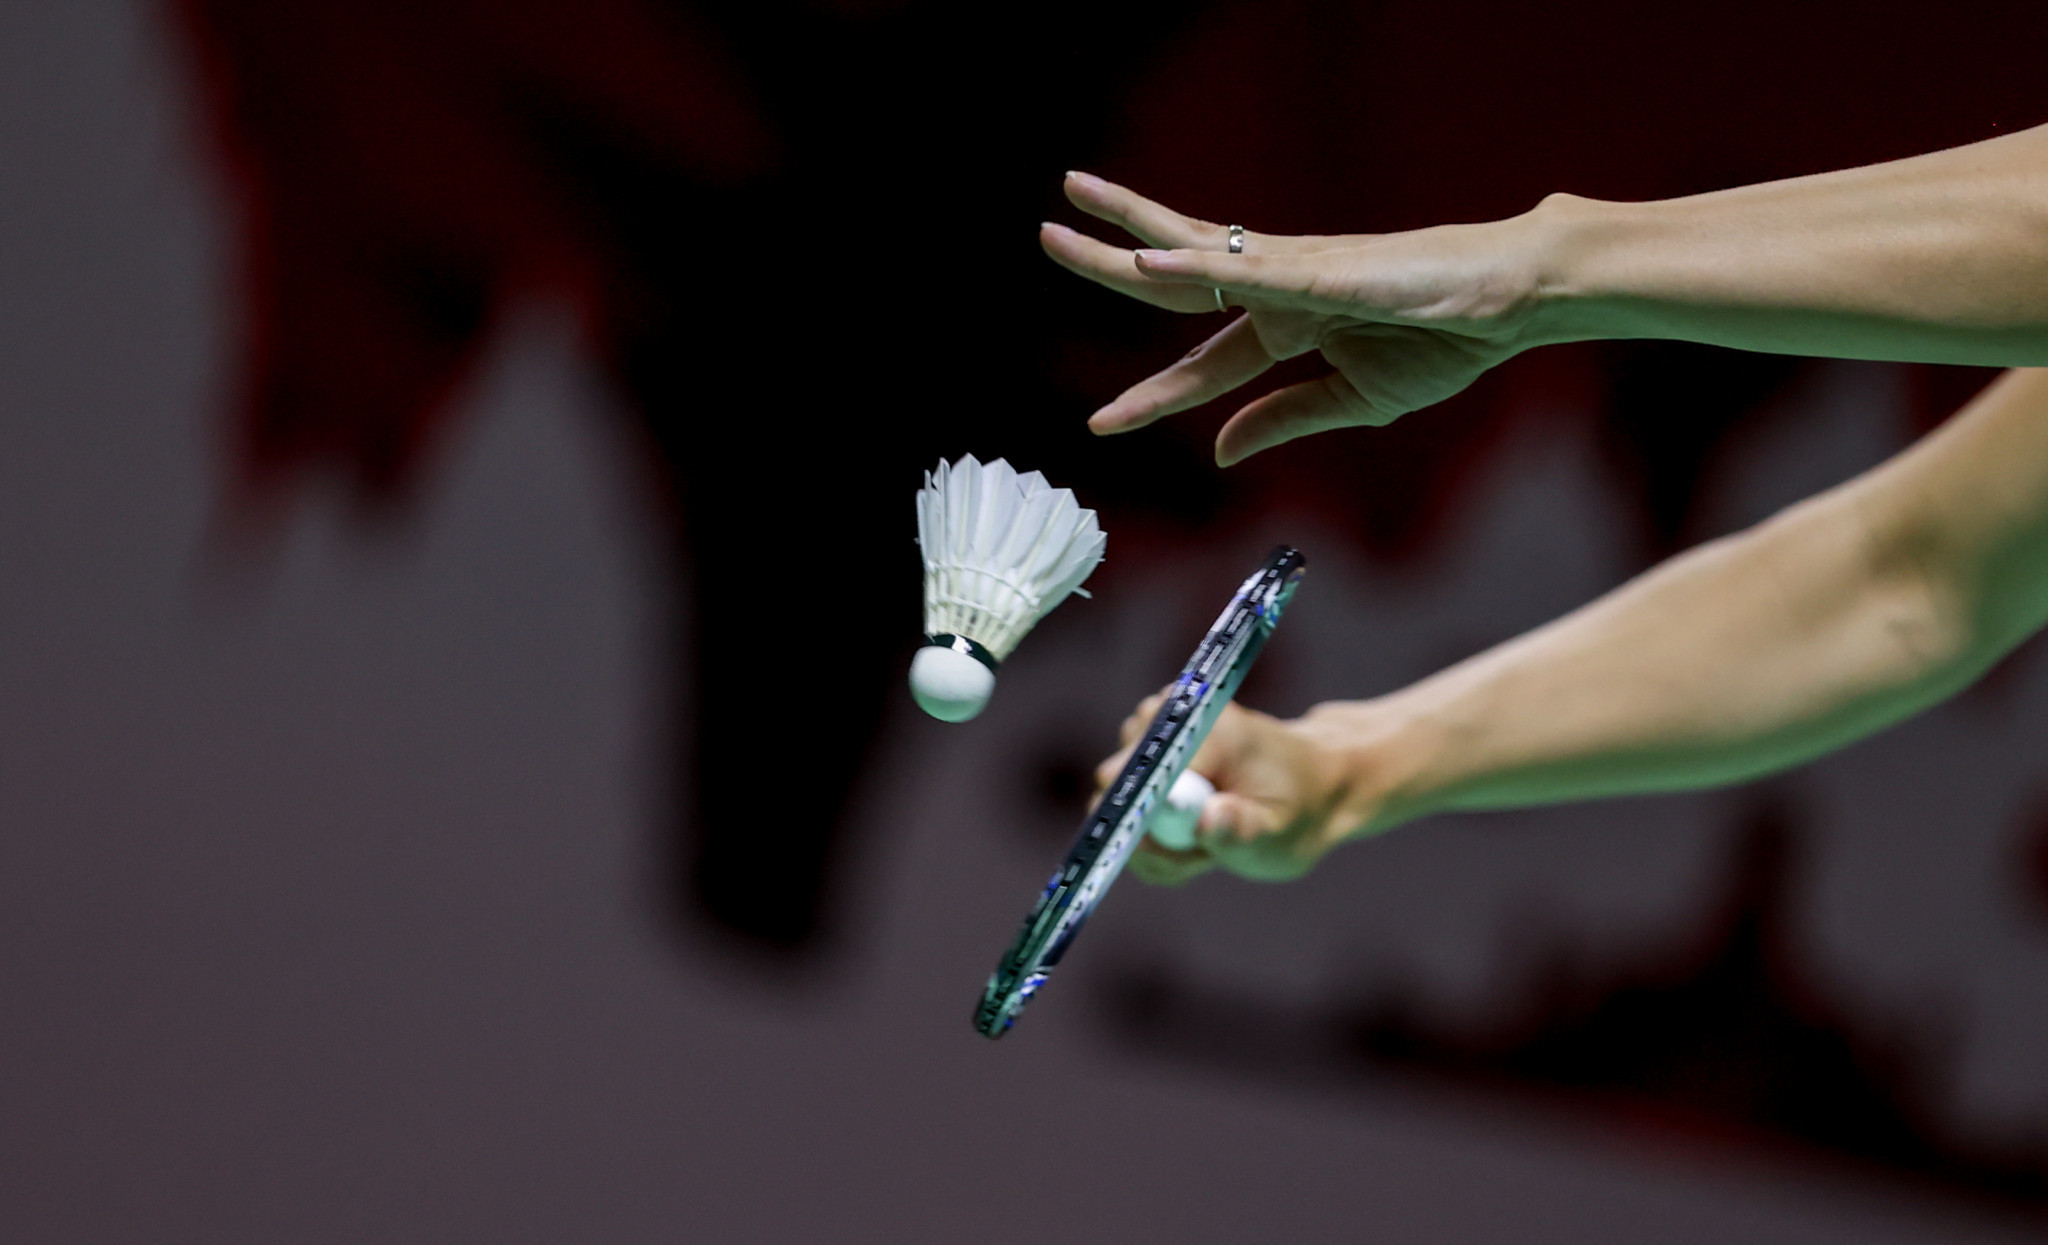 The BWF has extended its ban on the spin serve until after Paris 2024 ©BWF